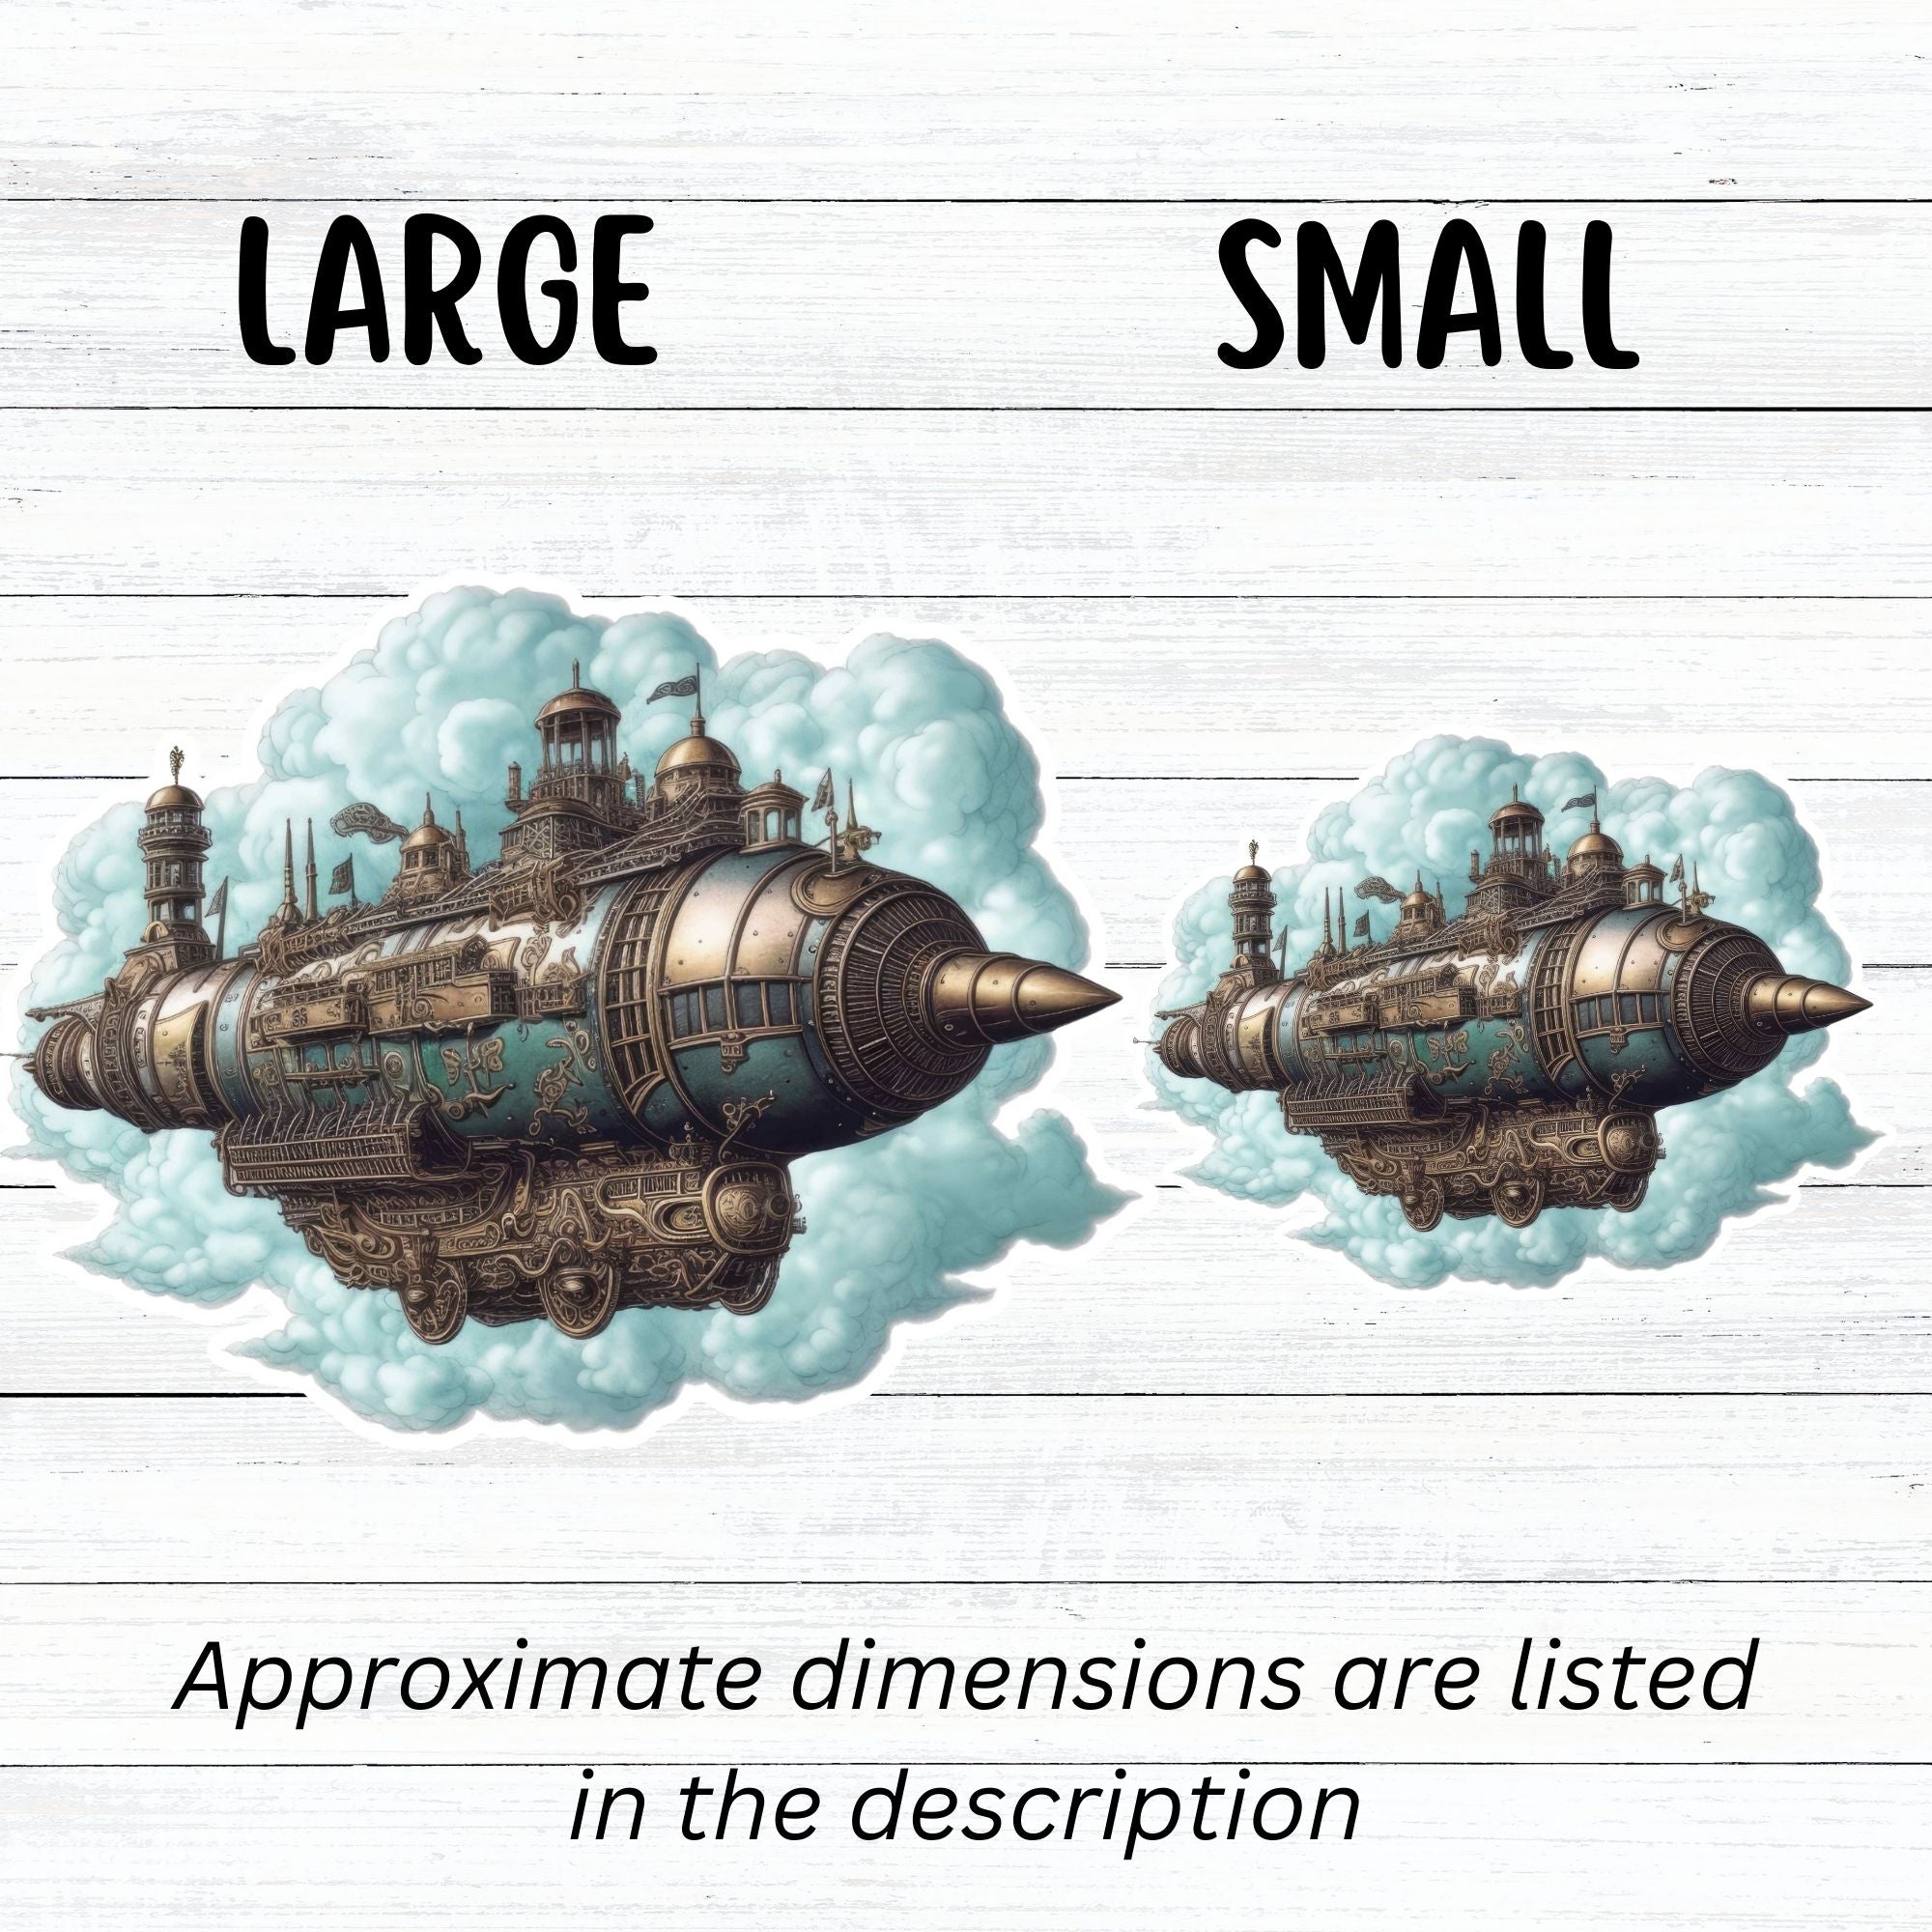 This image shows large and small Steampunk Airship 4 Die-Cut Stickers side by side.